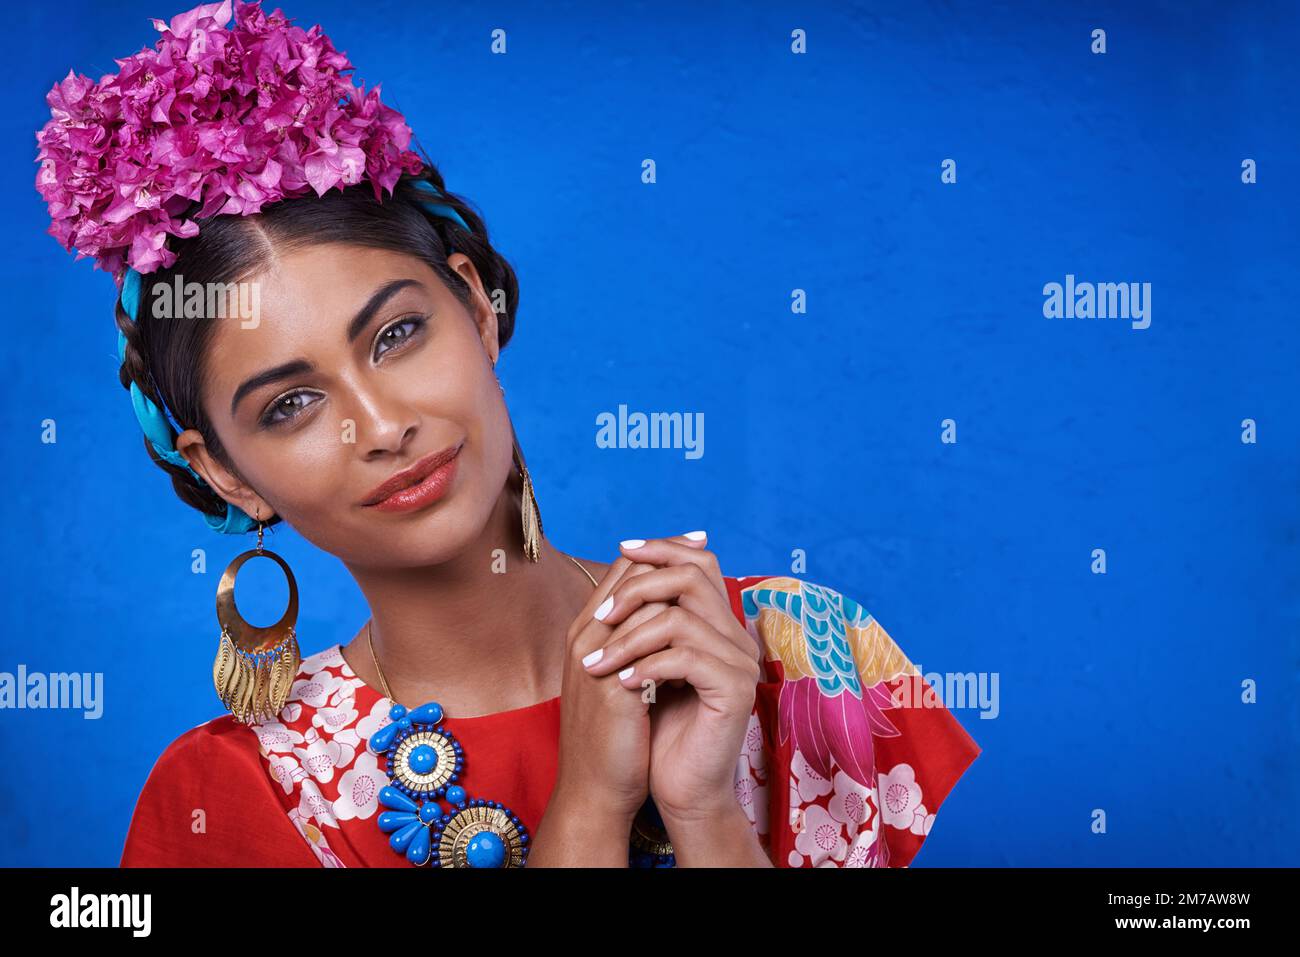 Colorful culture. A beautiful young woman wearing traditional cultural attire. Stock Photo